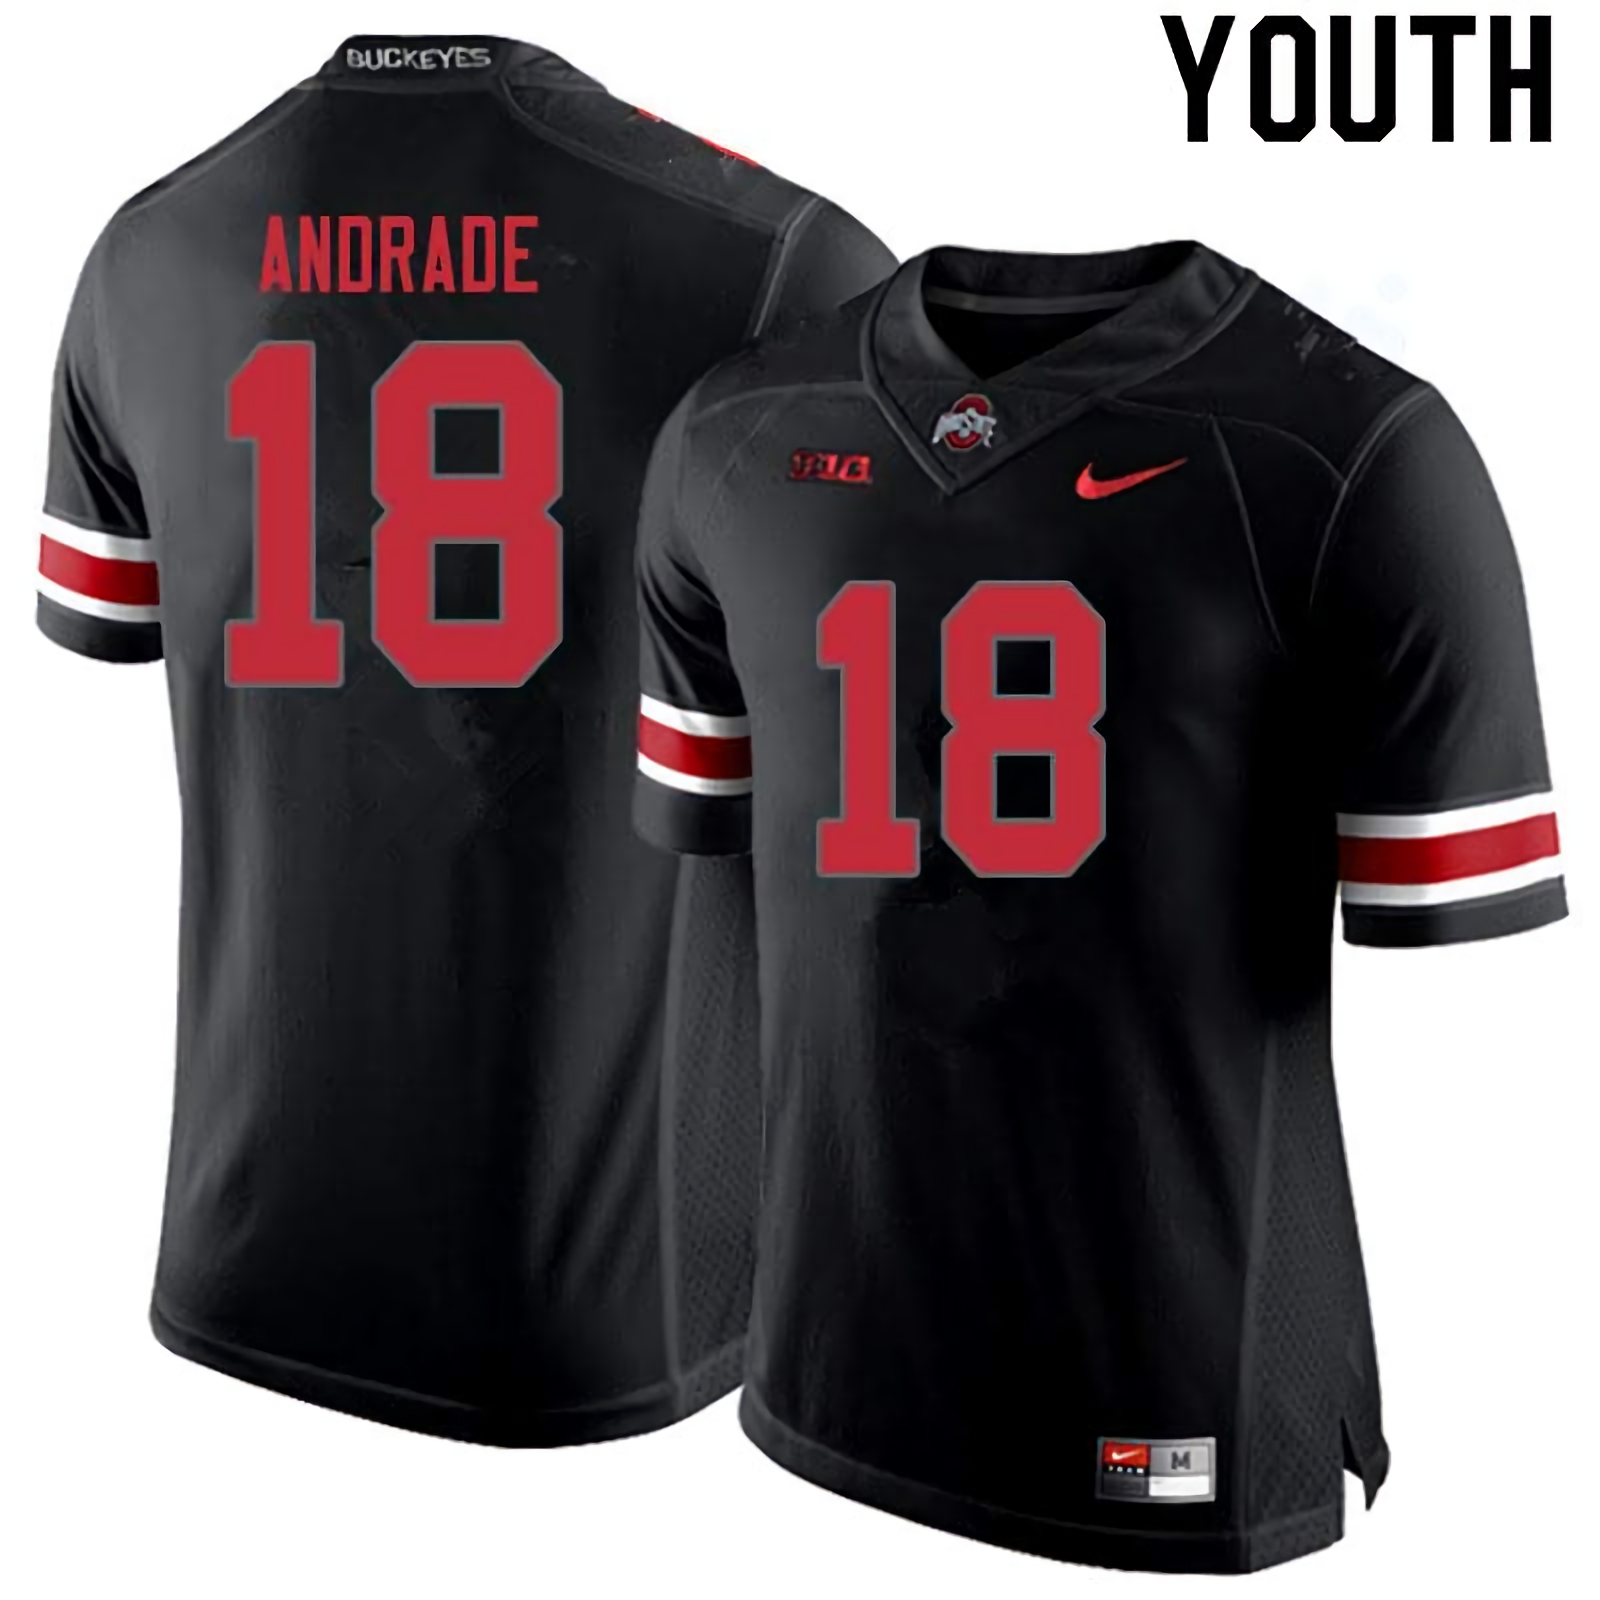 J.P. Andrade Ohio State Buckeyes Youth NCAA #18 Nike Blackout College Stitched Football Jersey LPW2556DQ